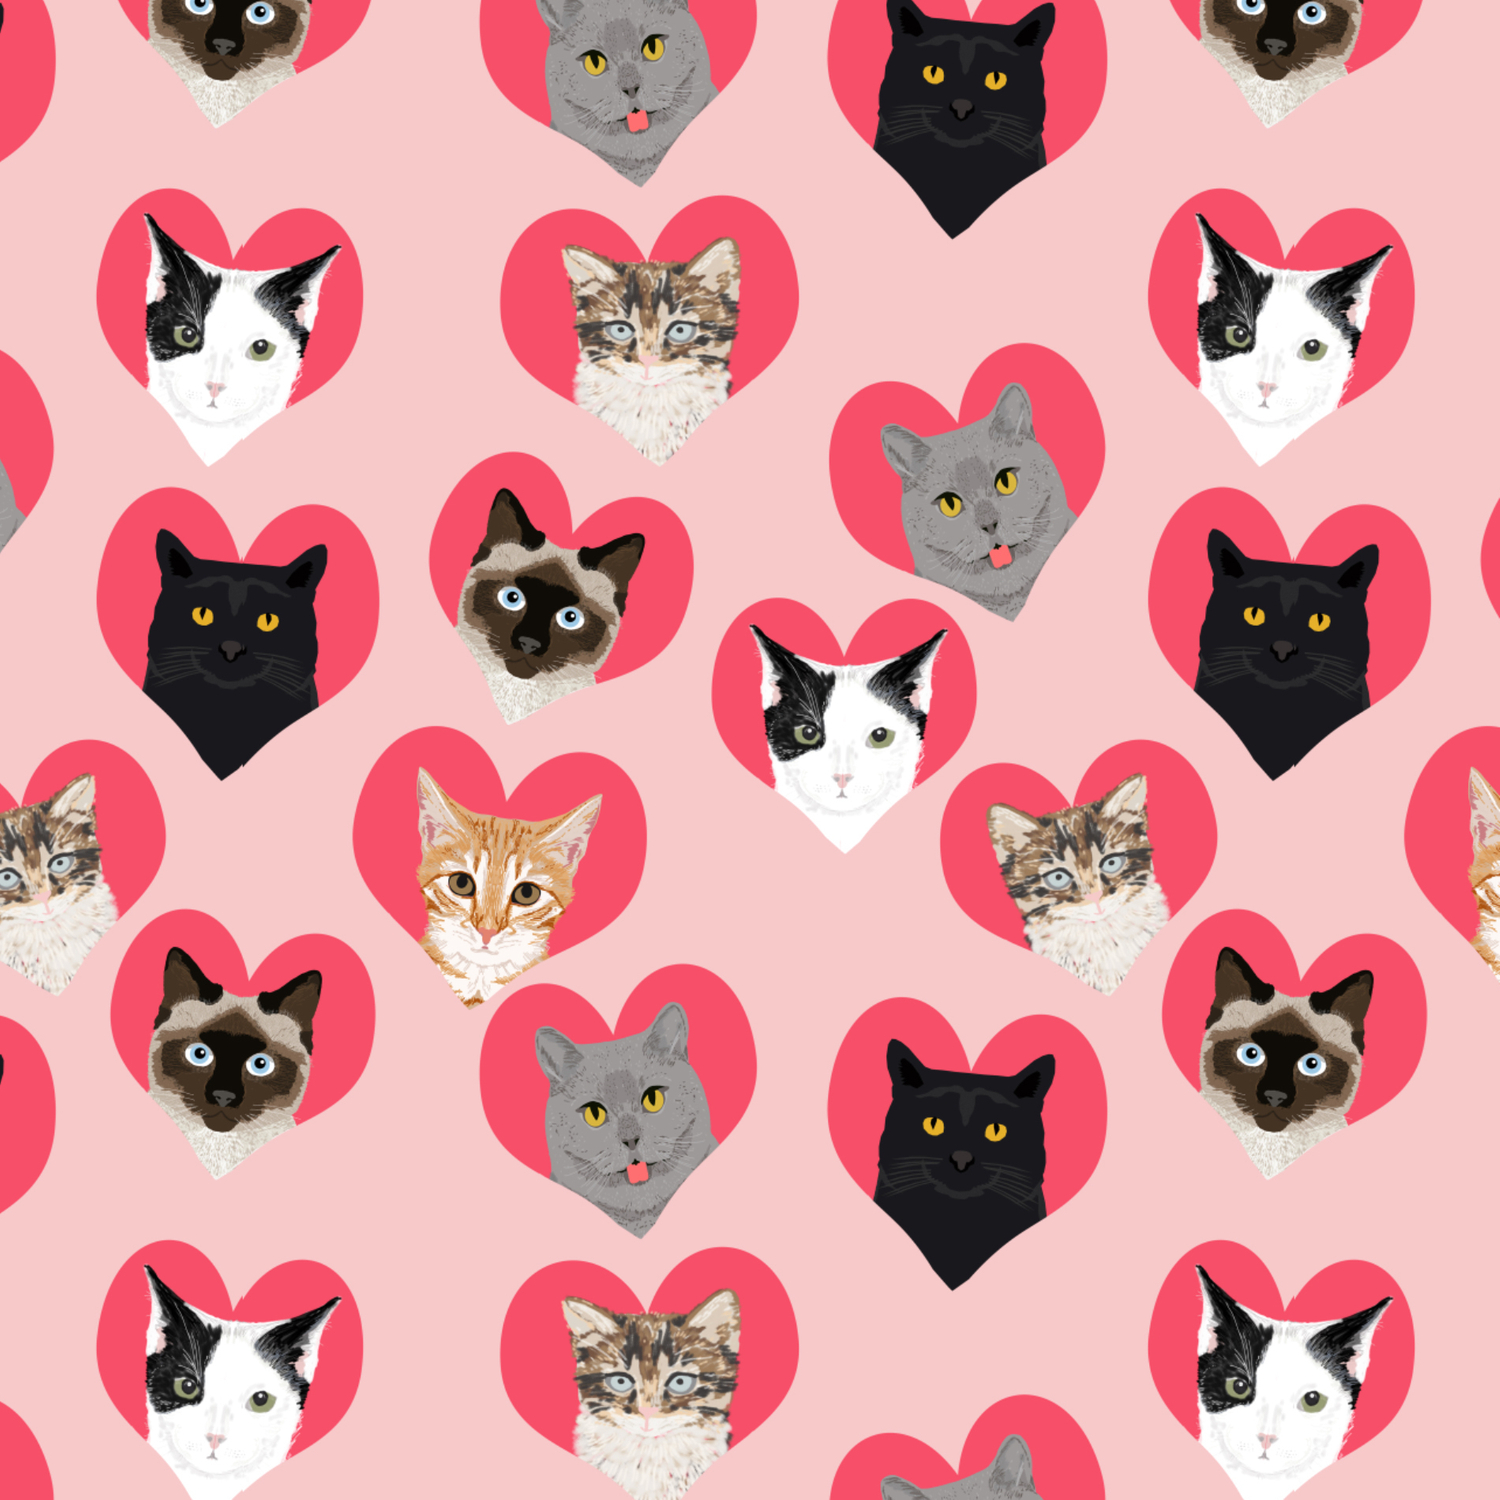 Cute cat collection hearts love valentines day gift for cat lady unique kitten funny illustration Leggings